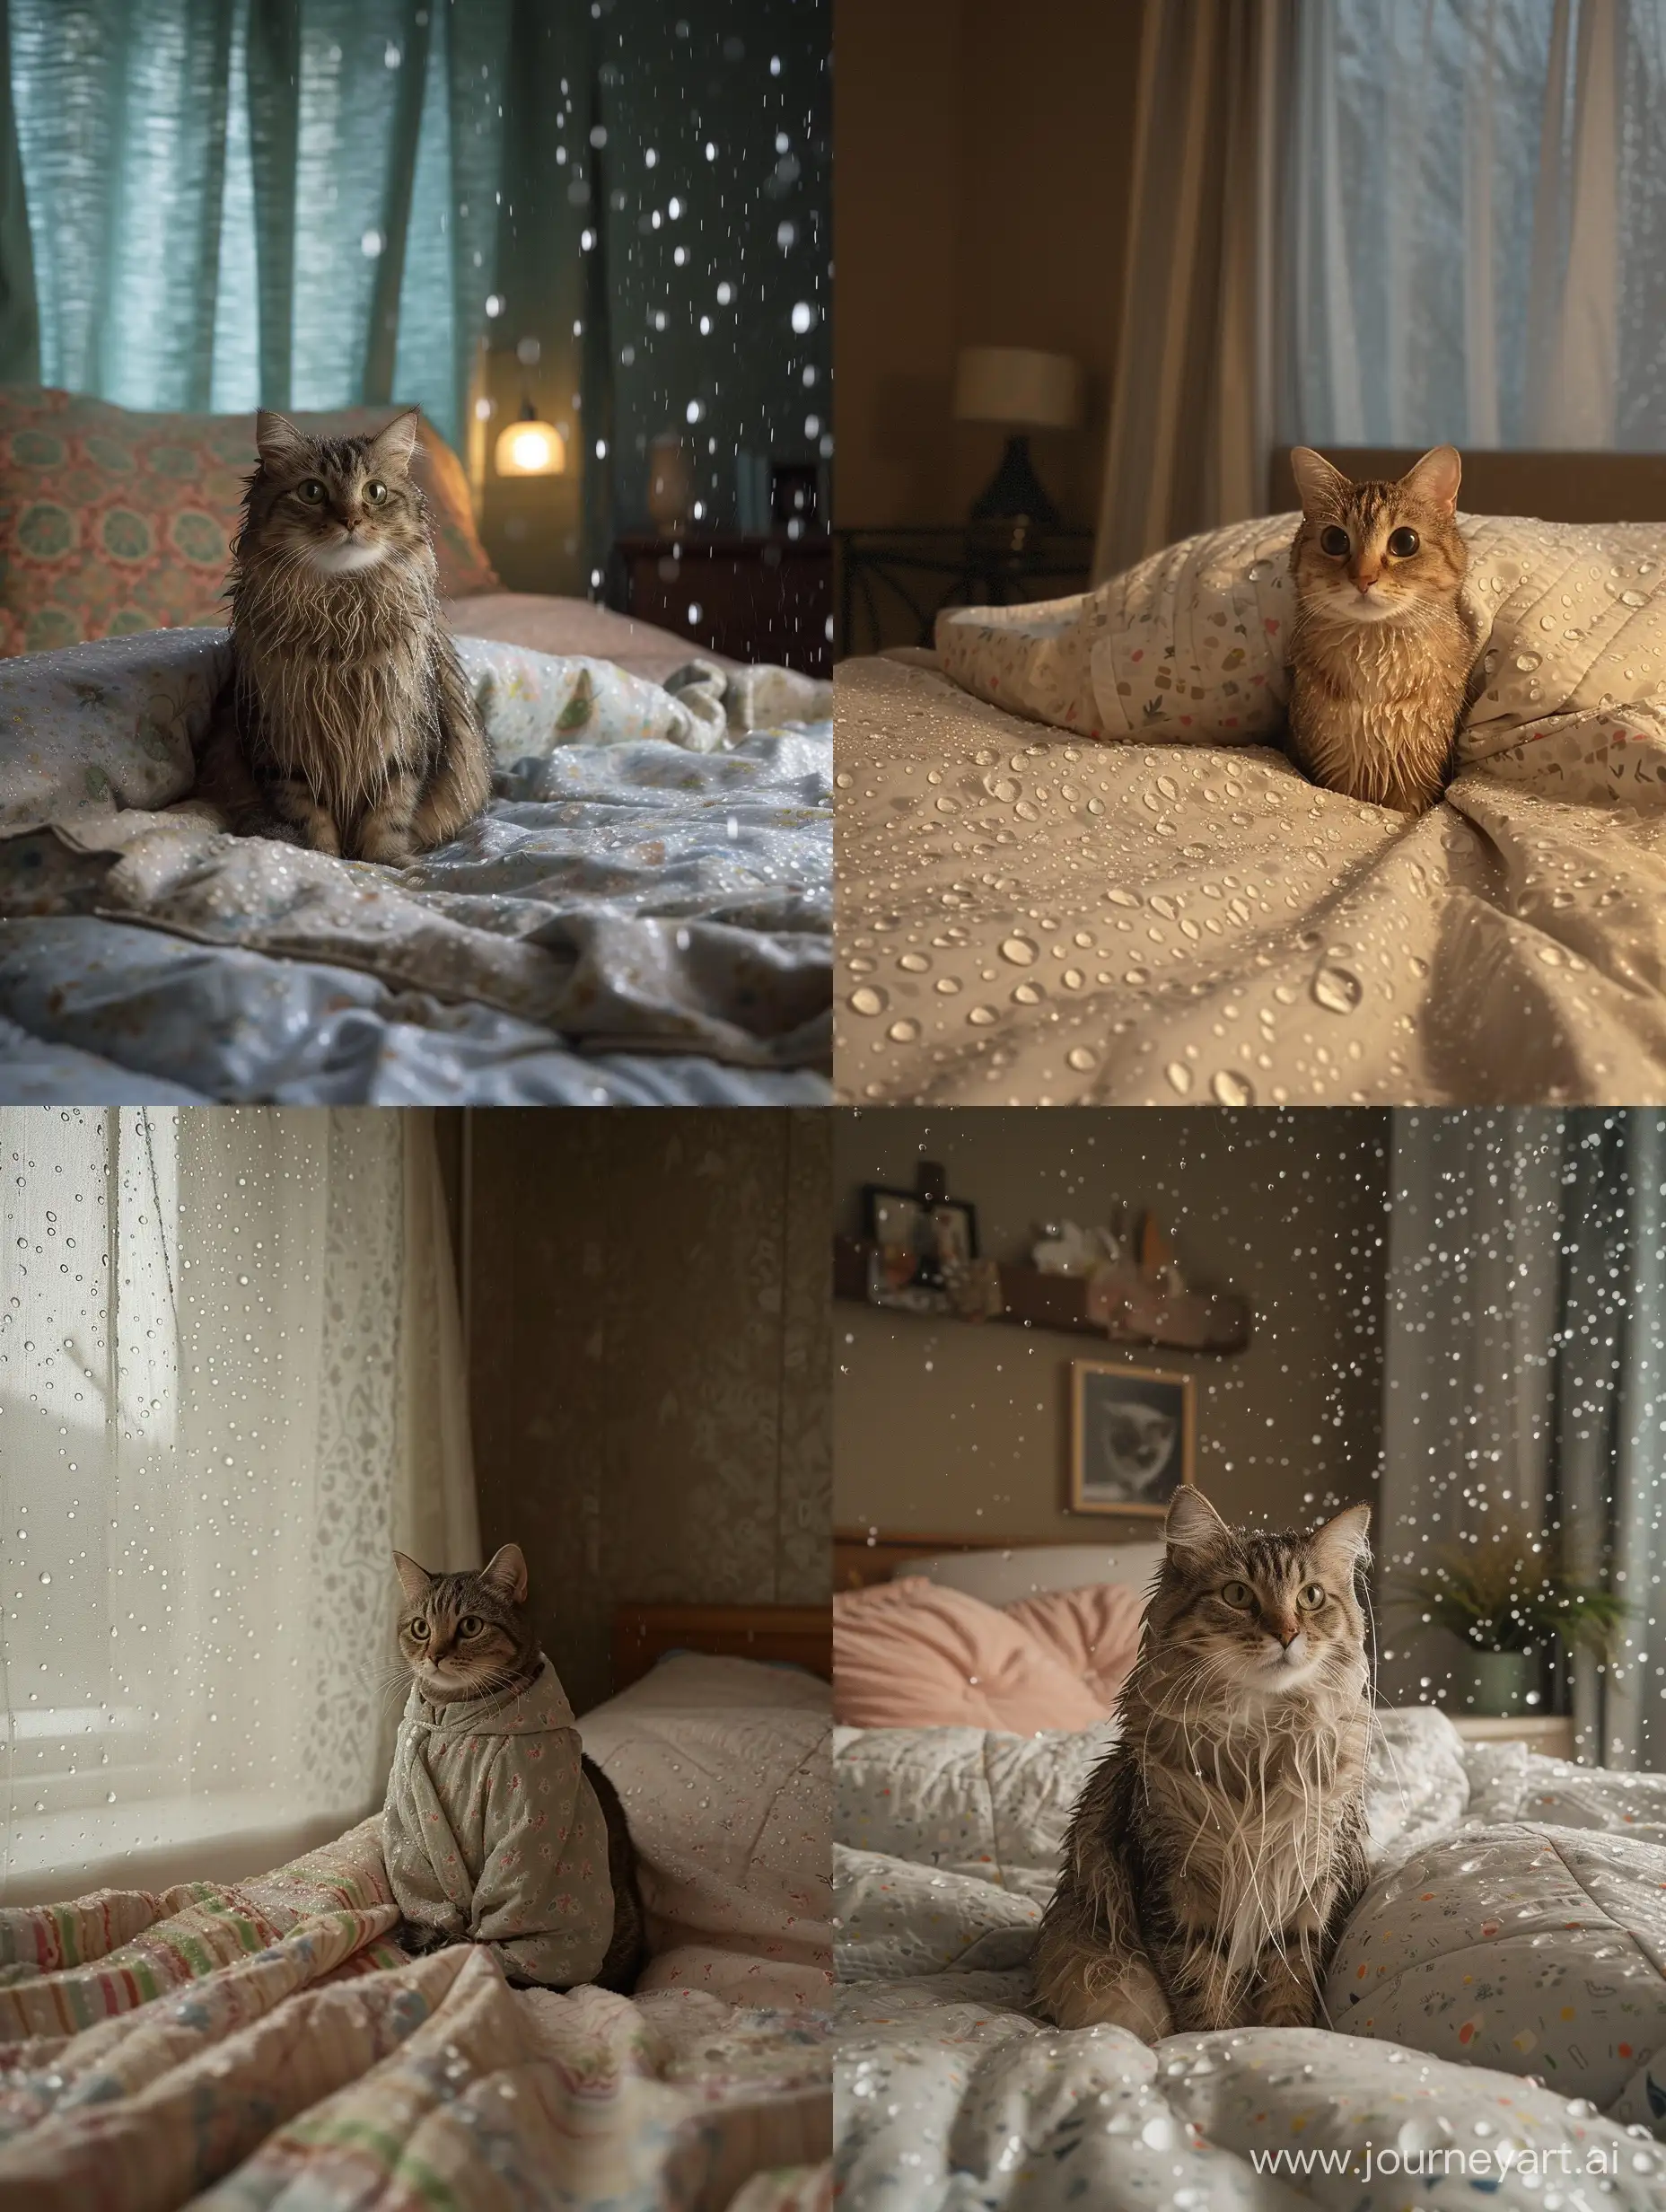 Cozy-Cat-in-Pajamas-Surrounded-by-Water-Droplets-on-Wet-Quilt